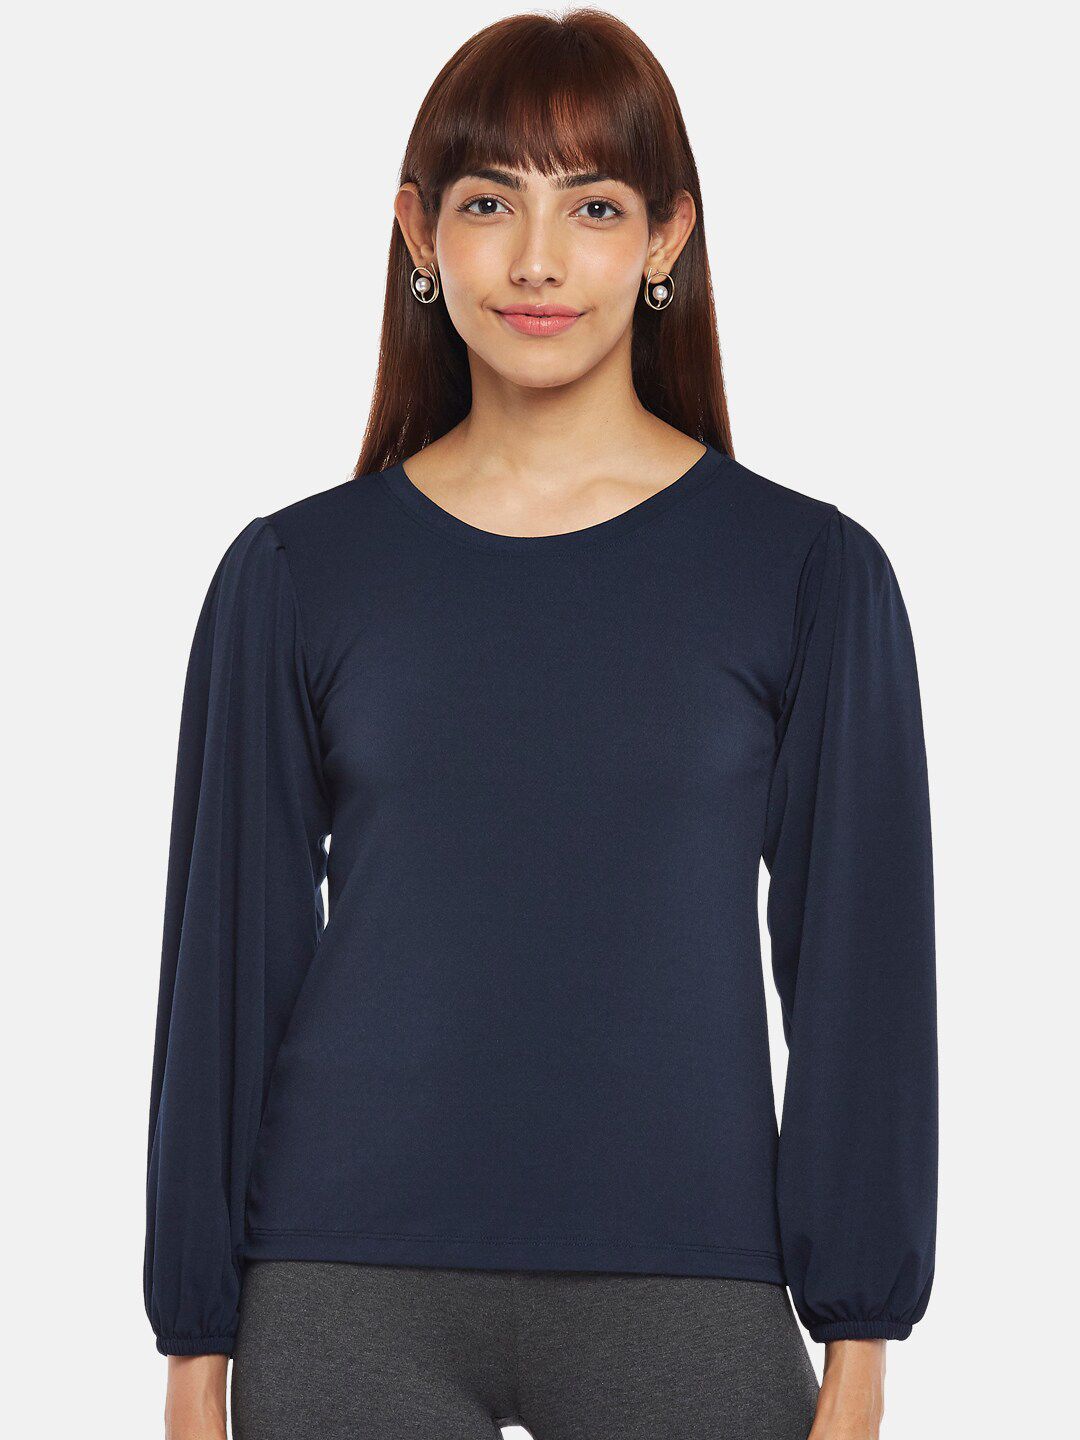 Annabelle by Pantaloons Women Navy Blue Cuff Sleeves Casual Top Price in India